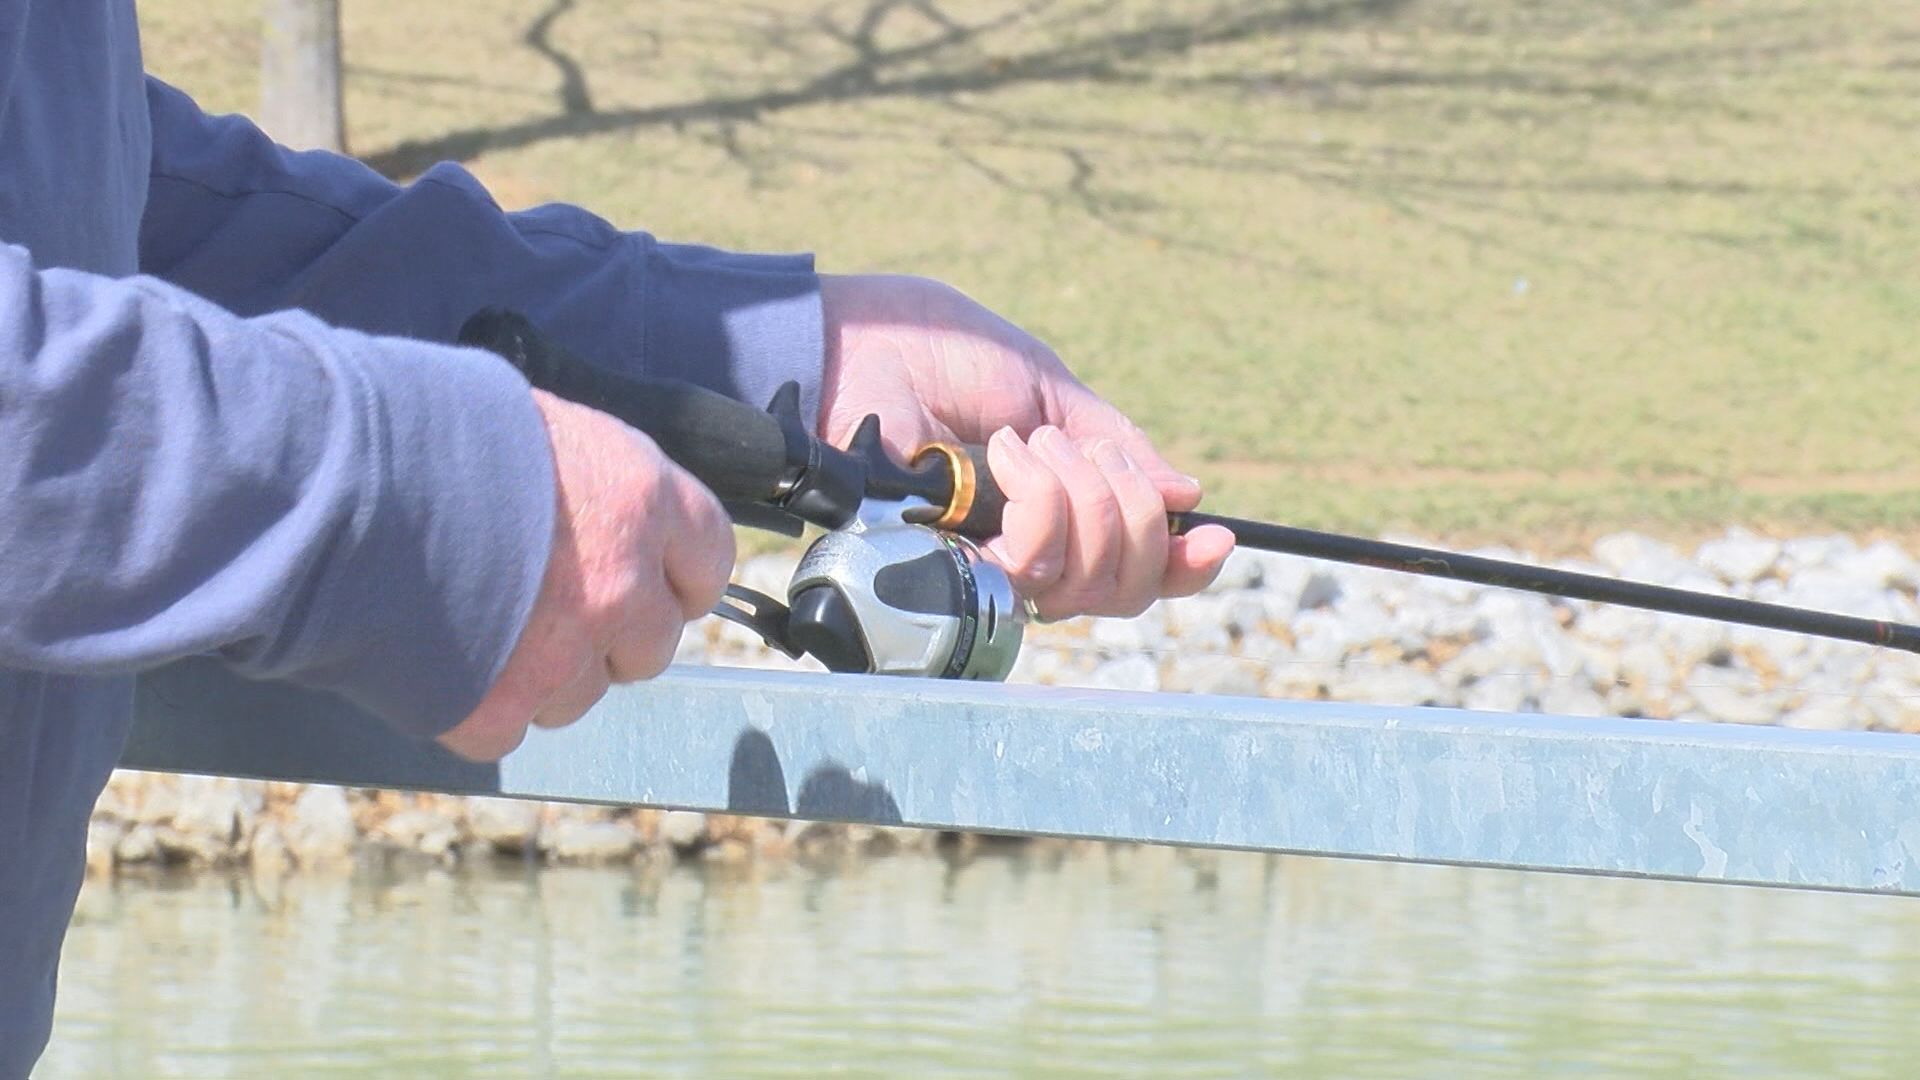 Illinois trout fishing season opens for 58 locations on April 1